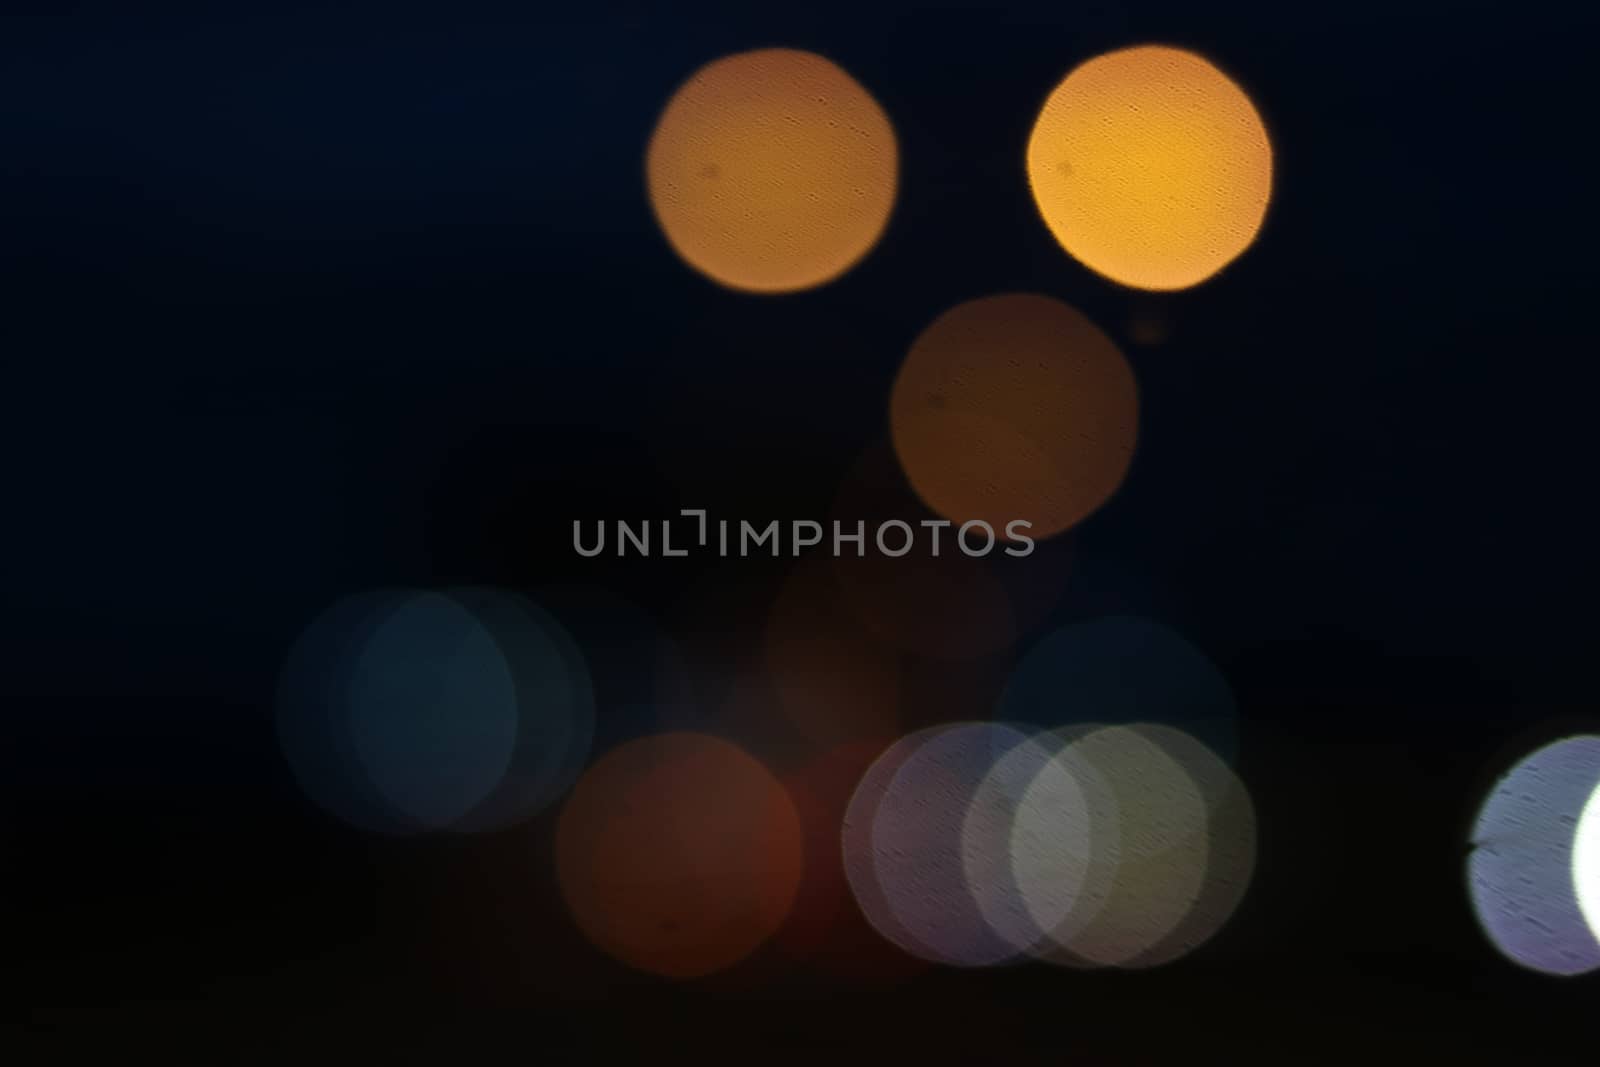 light bokeh on street and abstract background